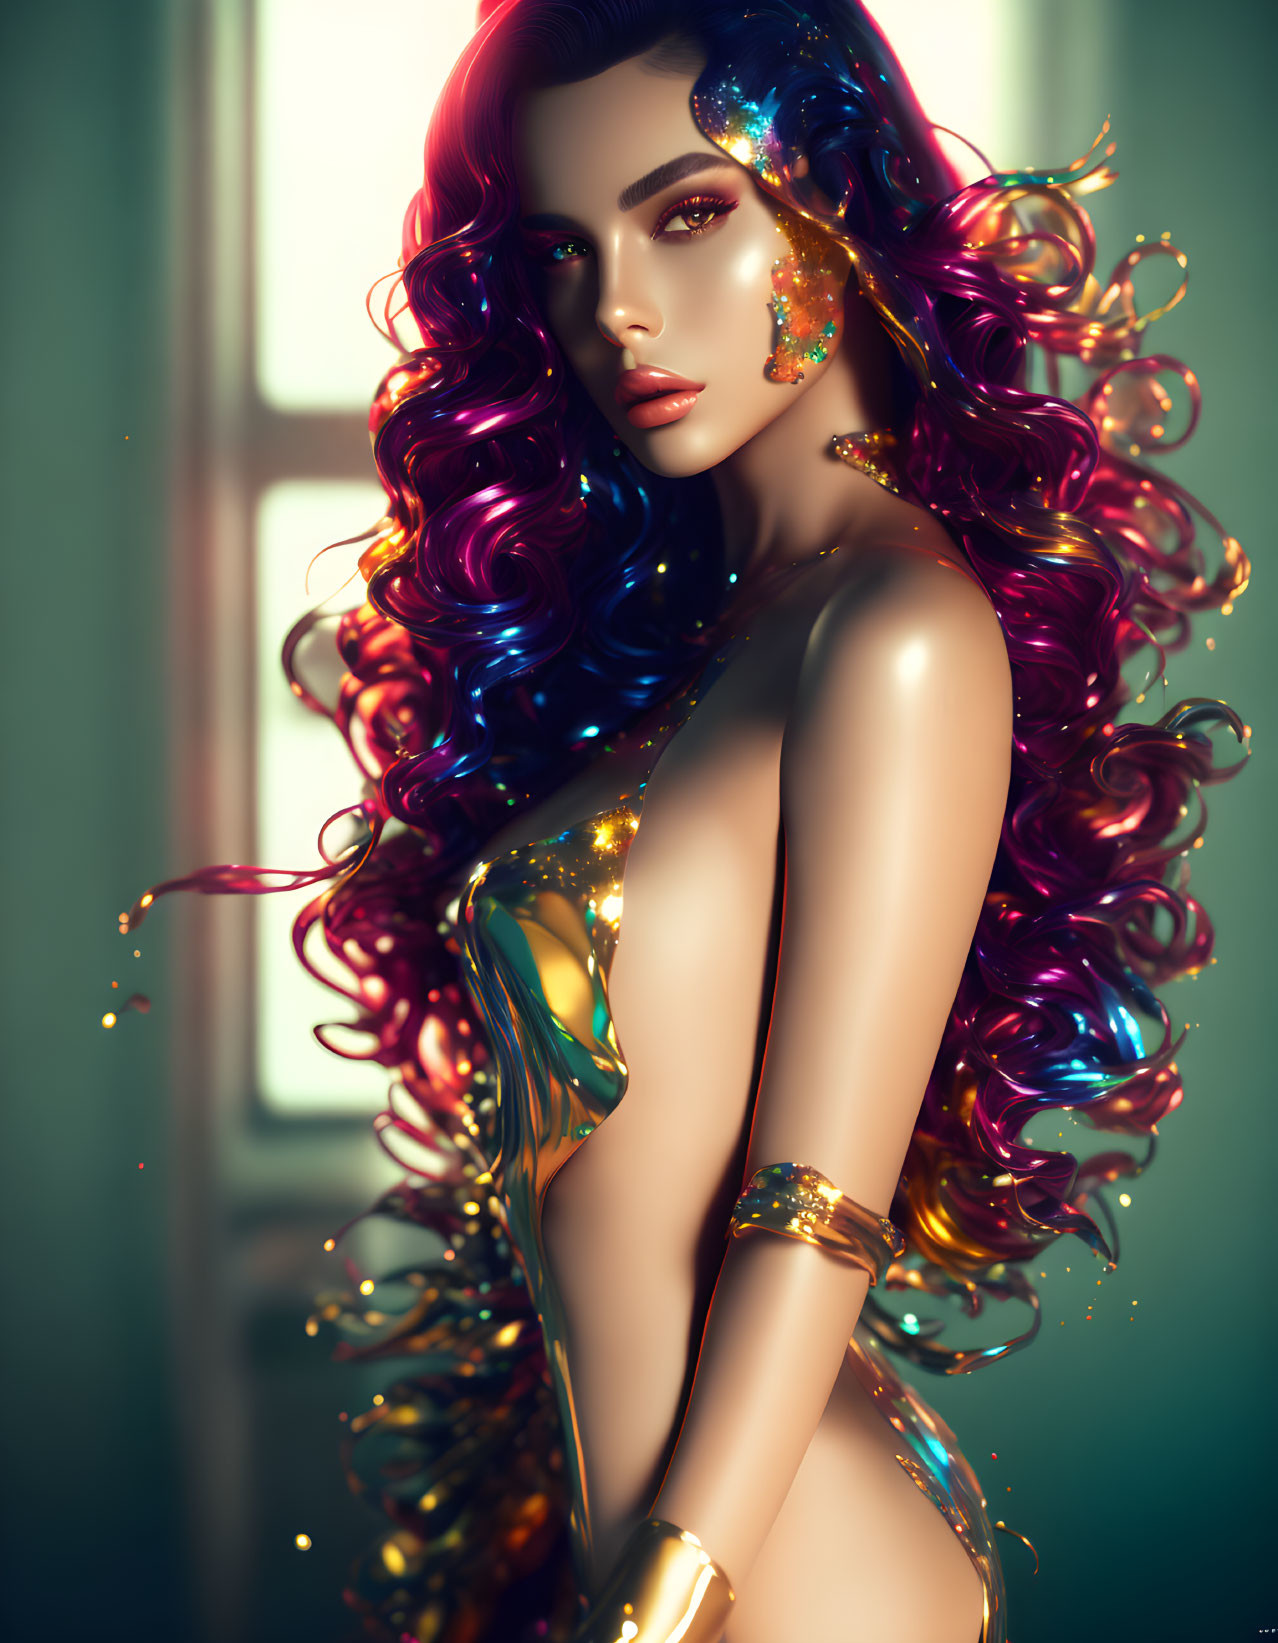 Multicolored hair woman with gold makeup-like splashes